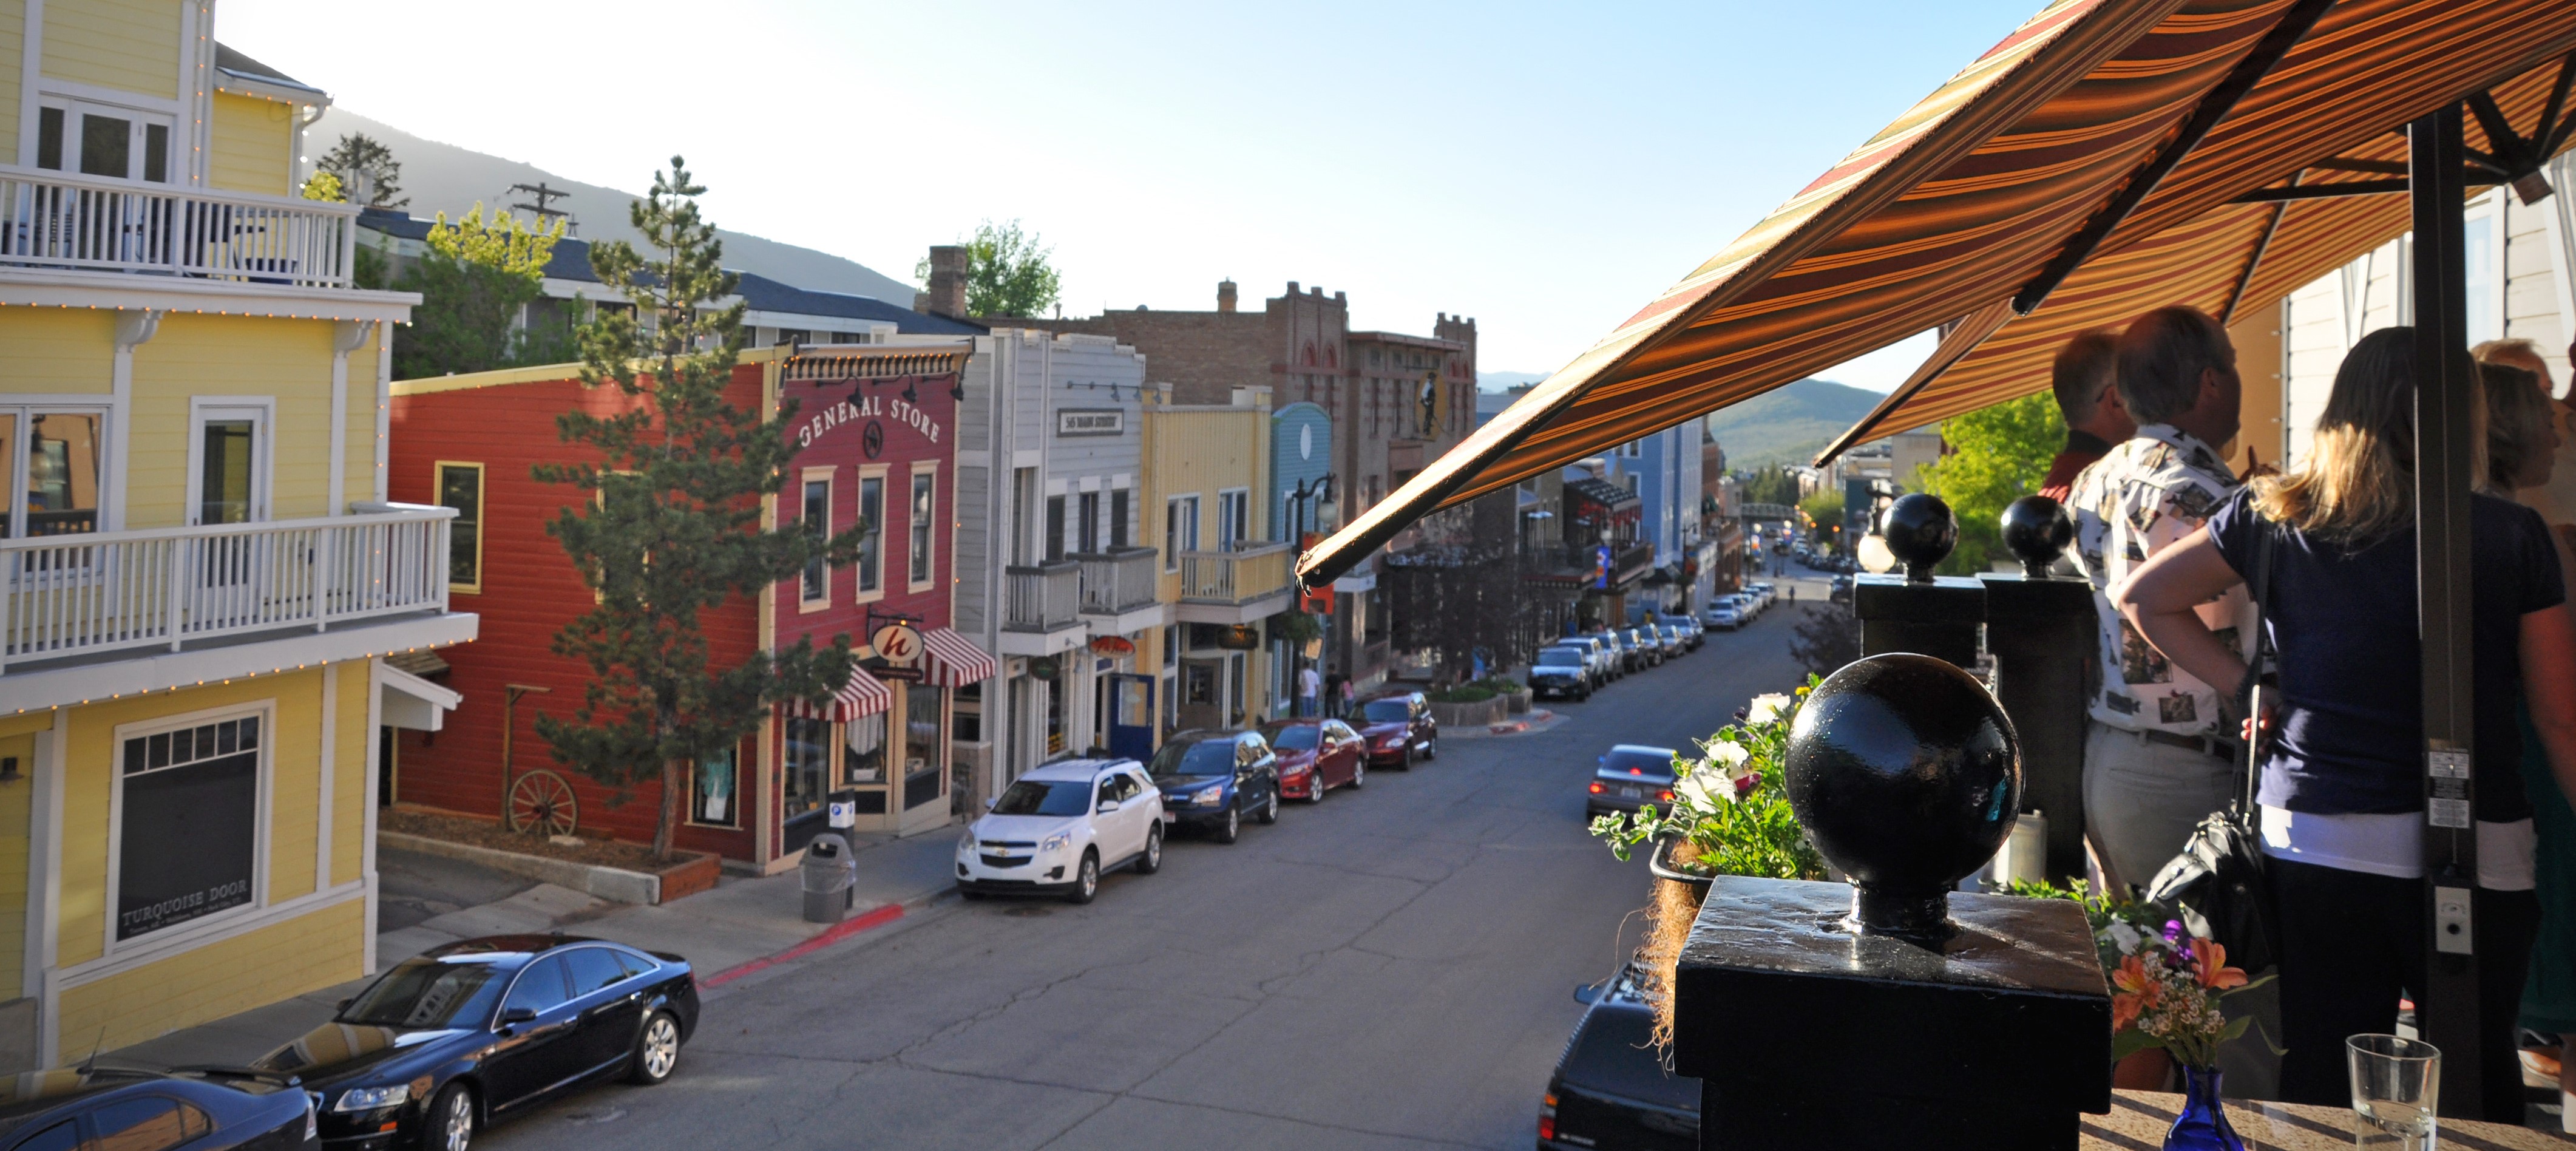 Park City Restaurants: 6 Places to Take Your Family